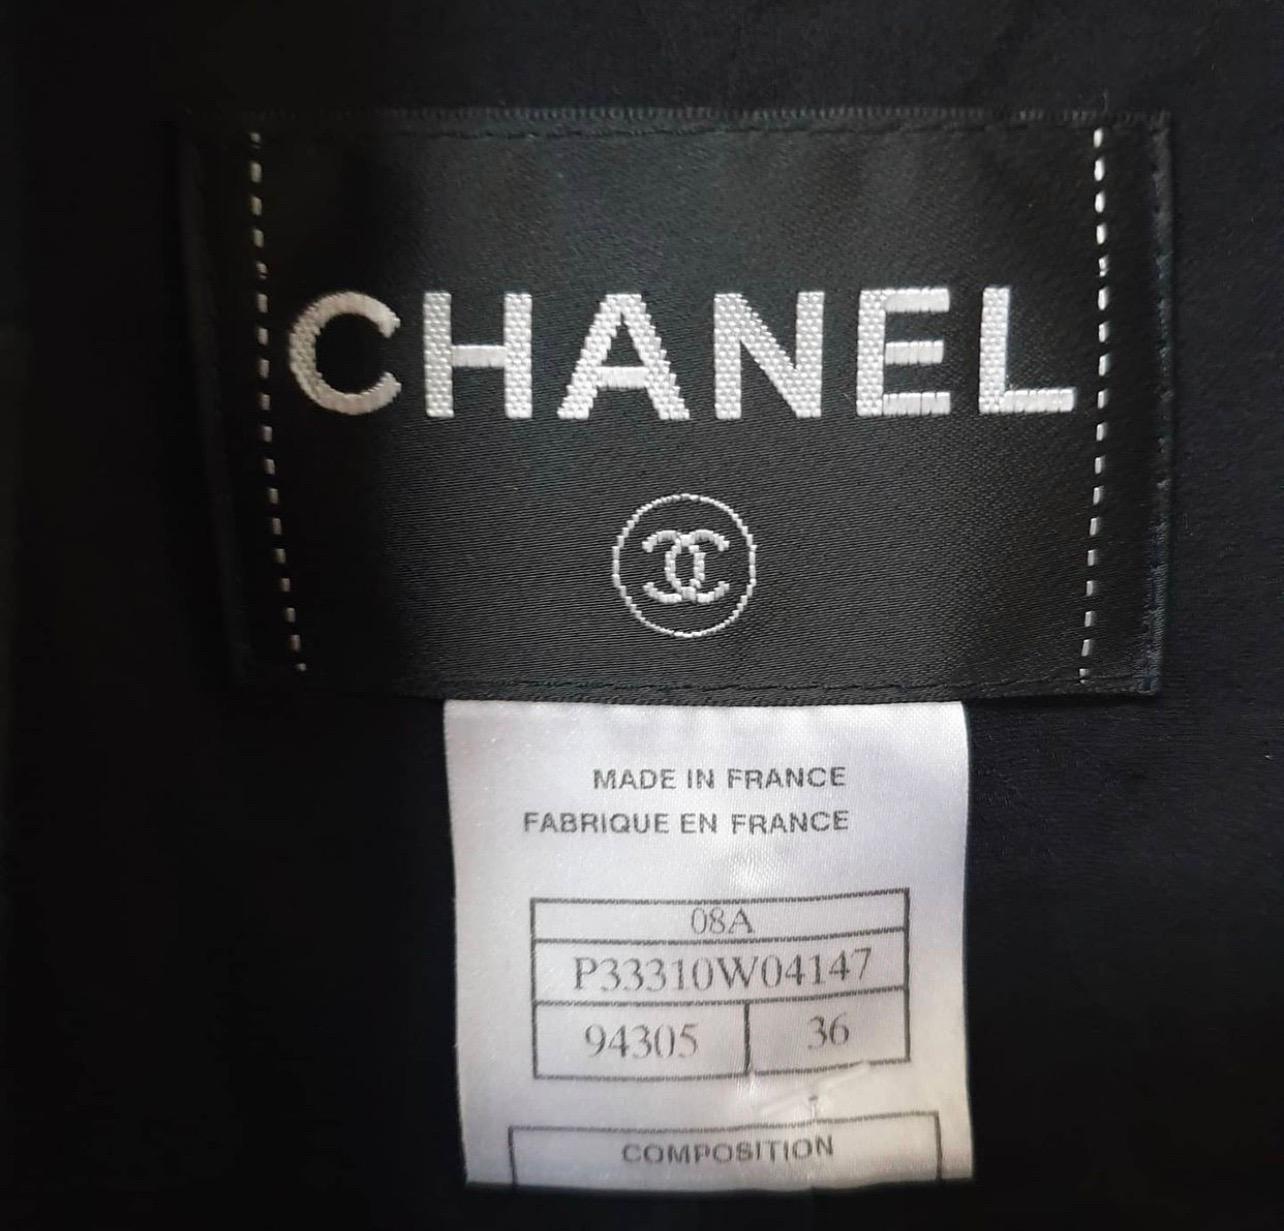 CHANEL JACKET CLASSIC BLACK WOOL

100% WOOL

PIPED TRIM SILK LINING

CHAIN HEM DETAIL

BLACK CROWN BUTTONS

2008 COLLECTION

Sz.36

Very good condition.

For buyers from EU we can provide shipping from Poland. Please demand if you need.
